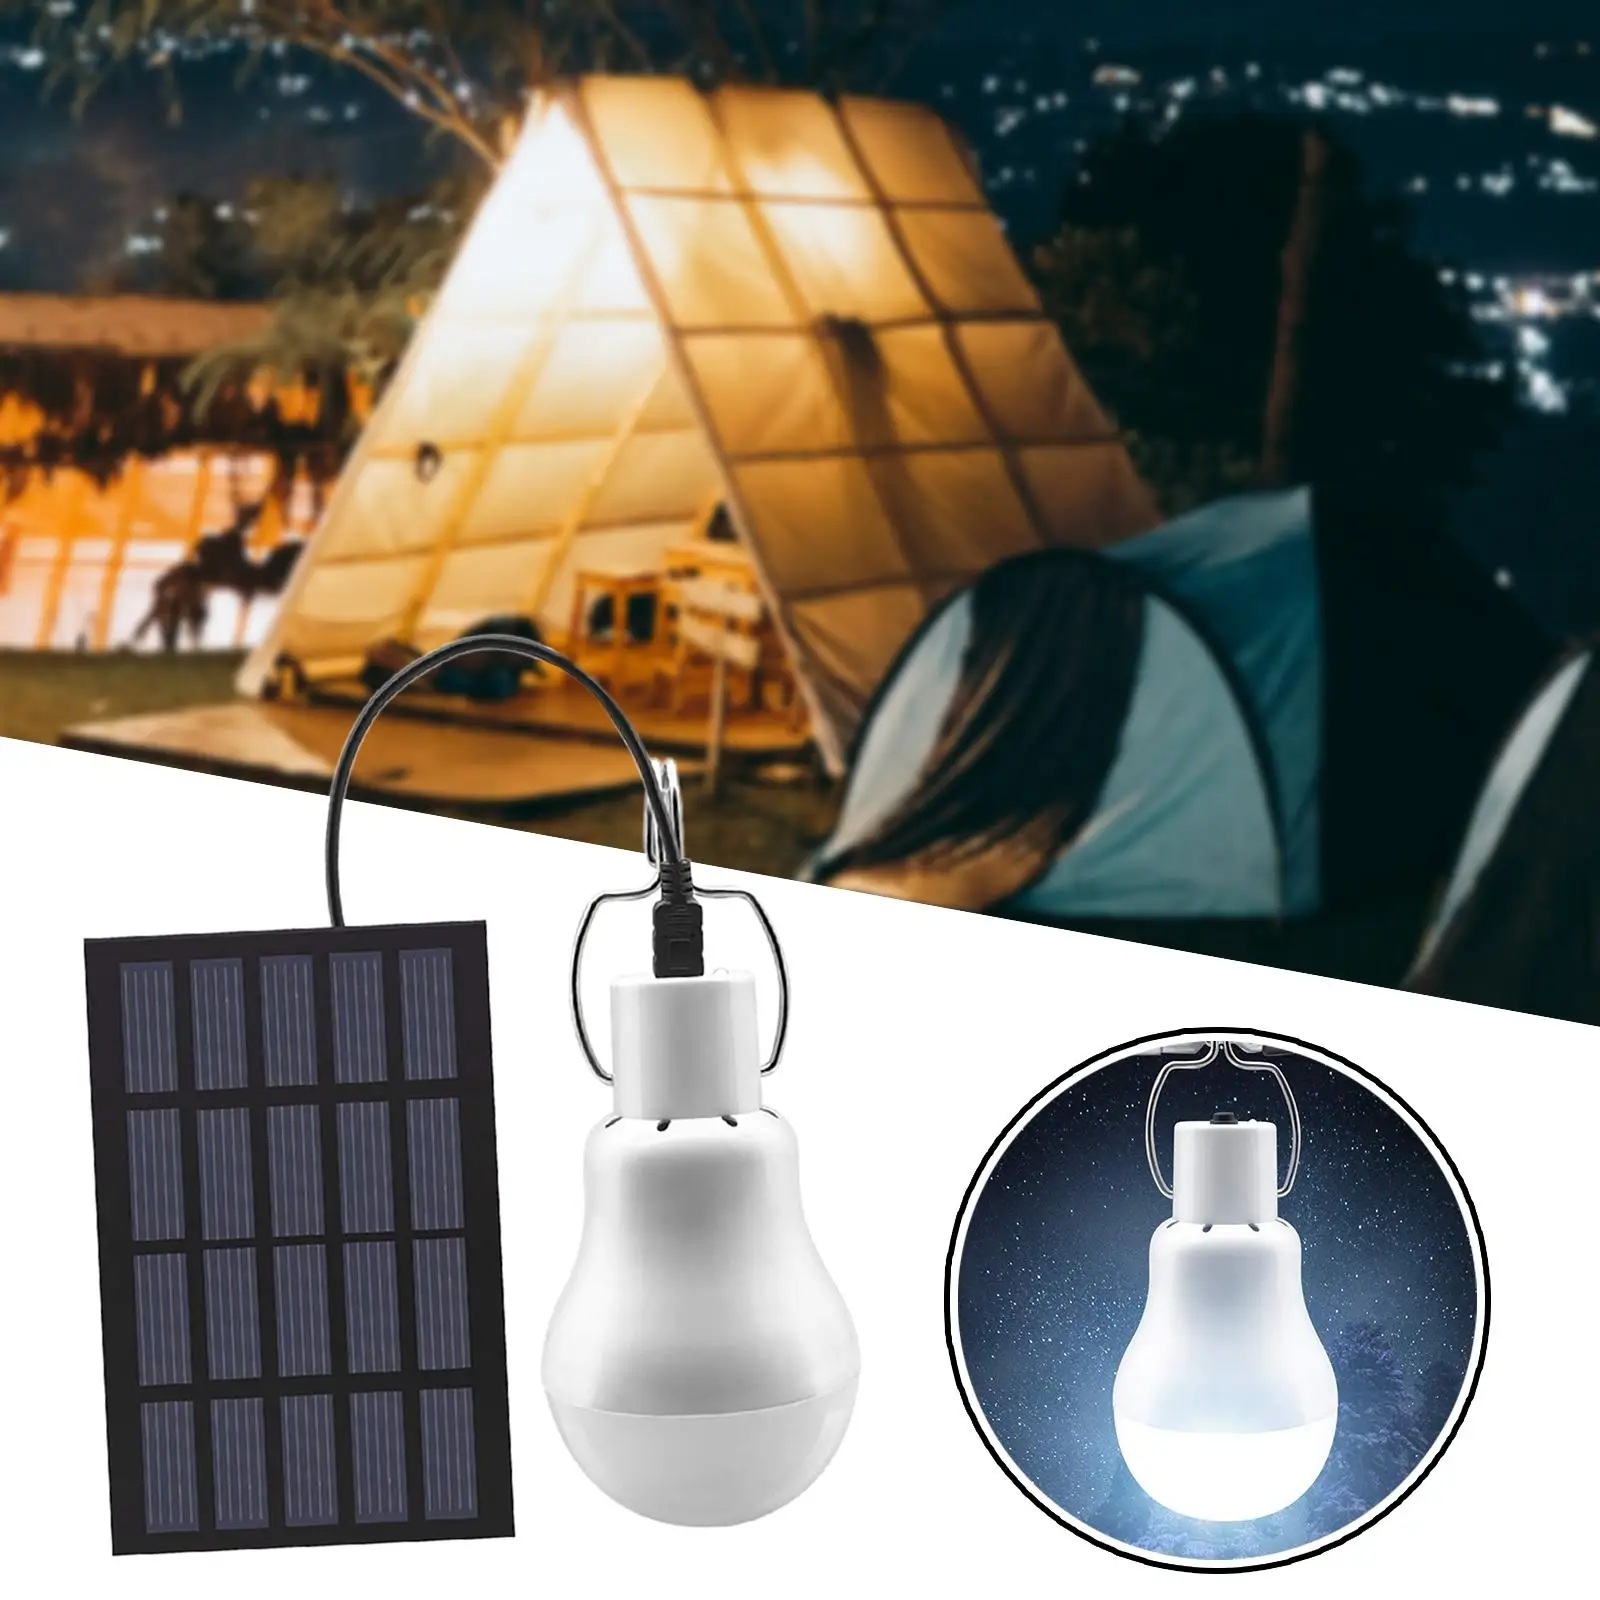 Portable LED Bulb Light Camping Solar Powered Panel Garden Hanging Lamp Lighting for Indoor Outdoor Yard Backpacking Lamp